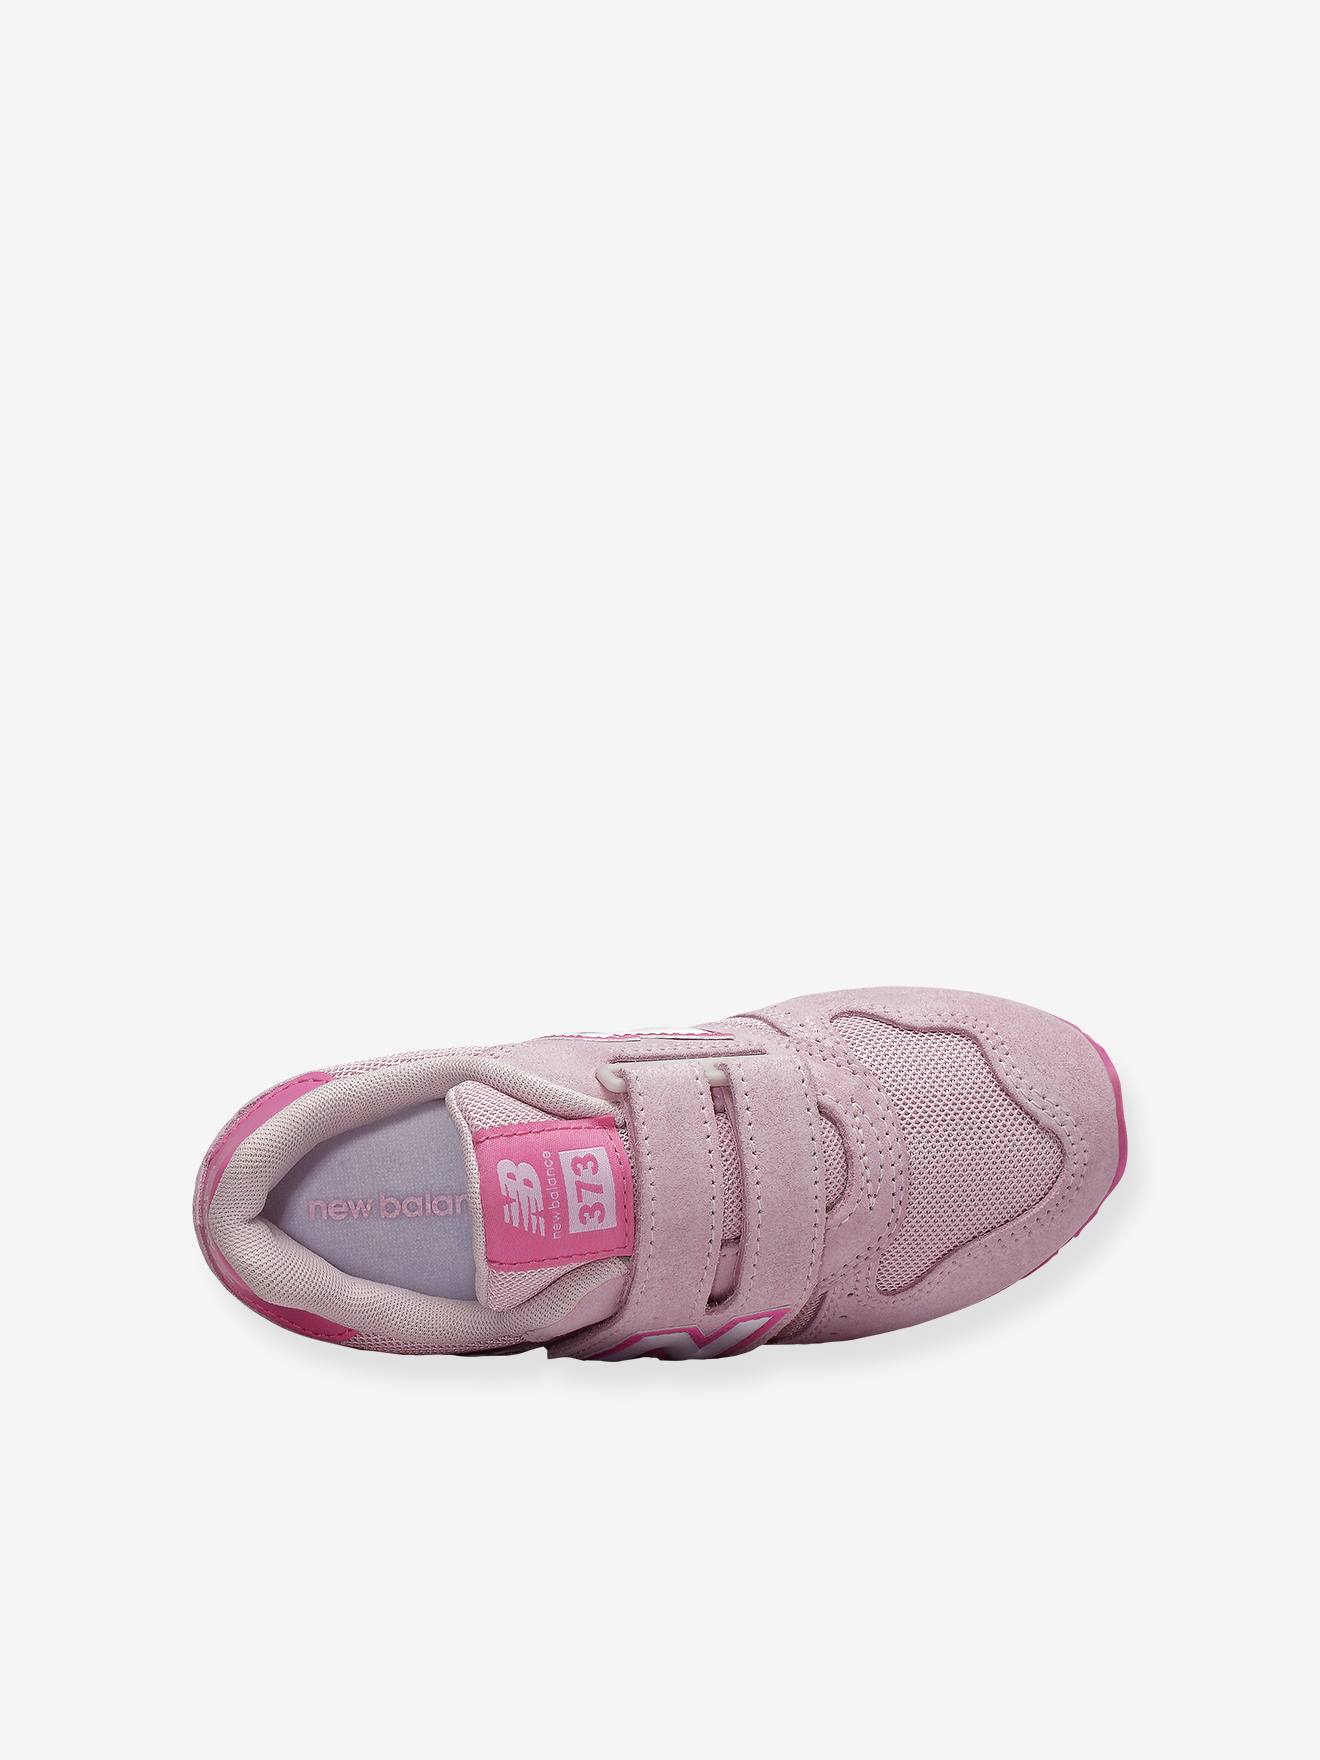 Baskets cuir scratchées fille YV373SP NEW BALANCE rose clair - New ...